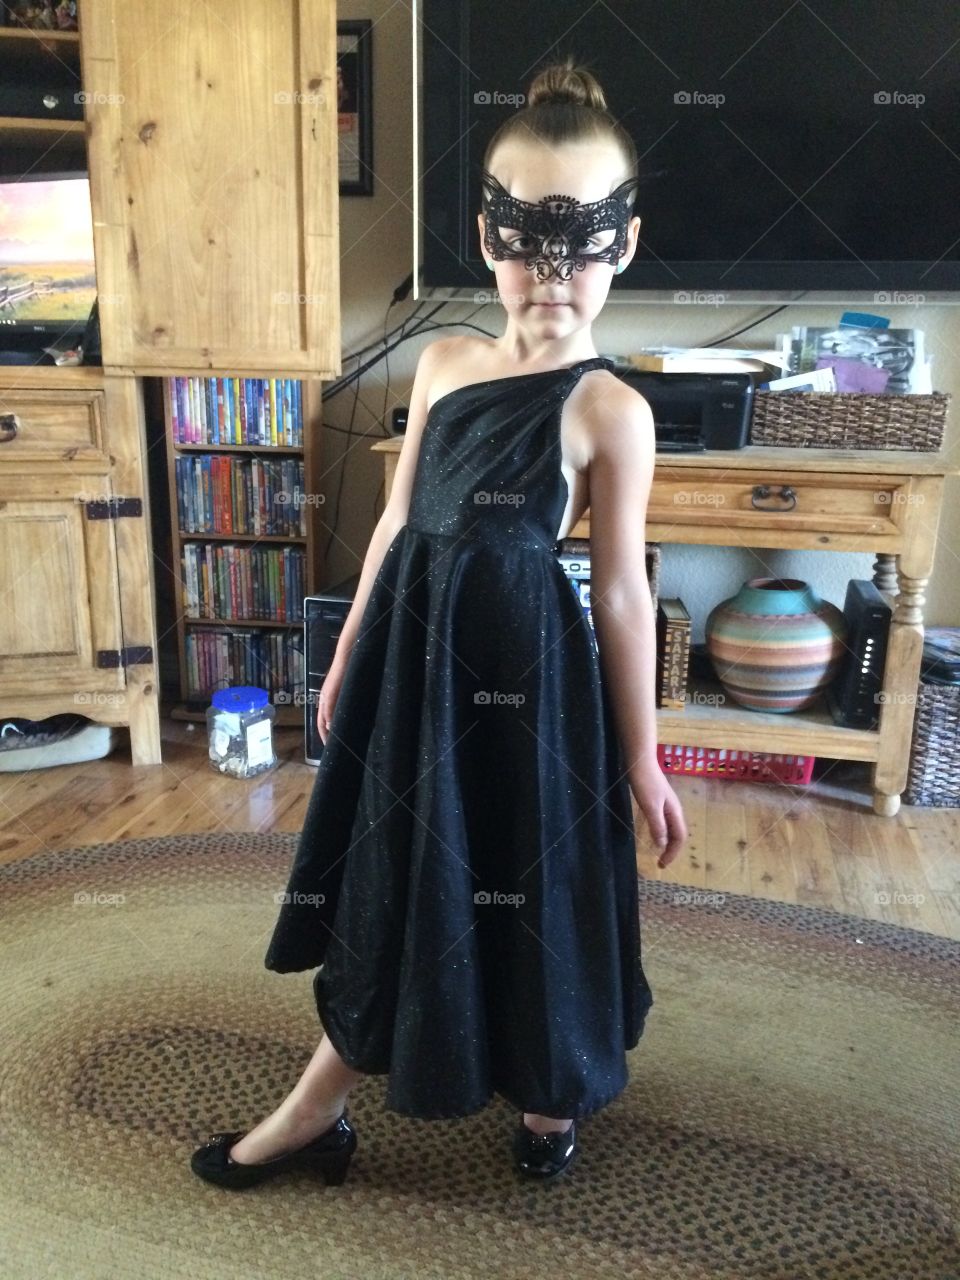 Dramatic daughter in couture ball gown. (Designed and created by me!)